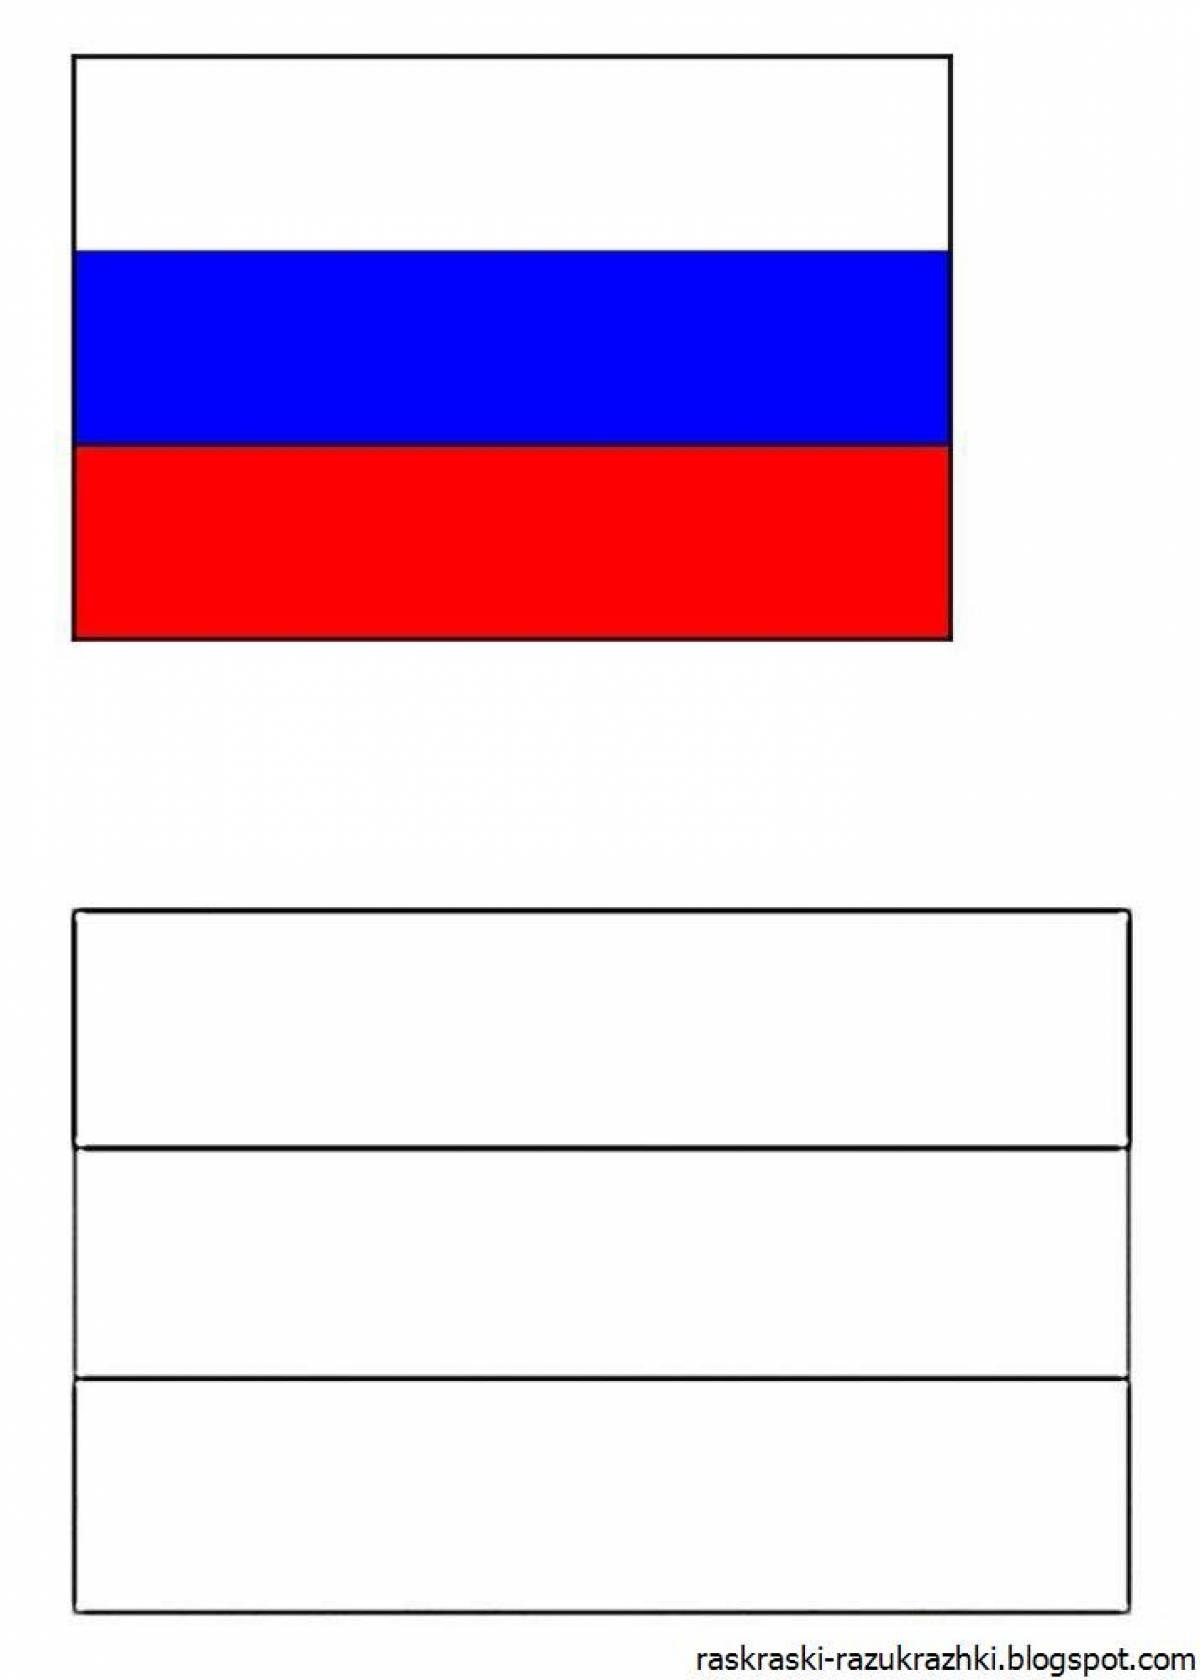 Coloring page bright flag of russia